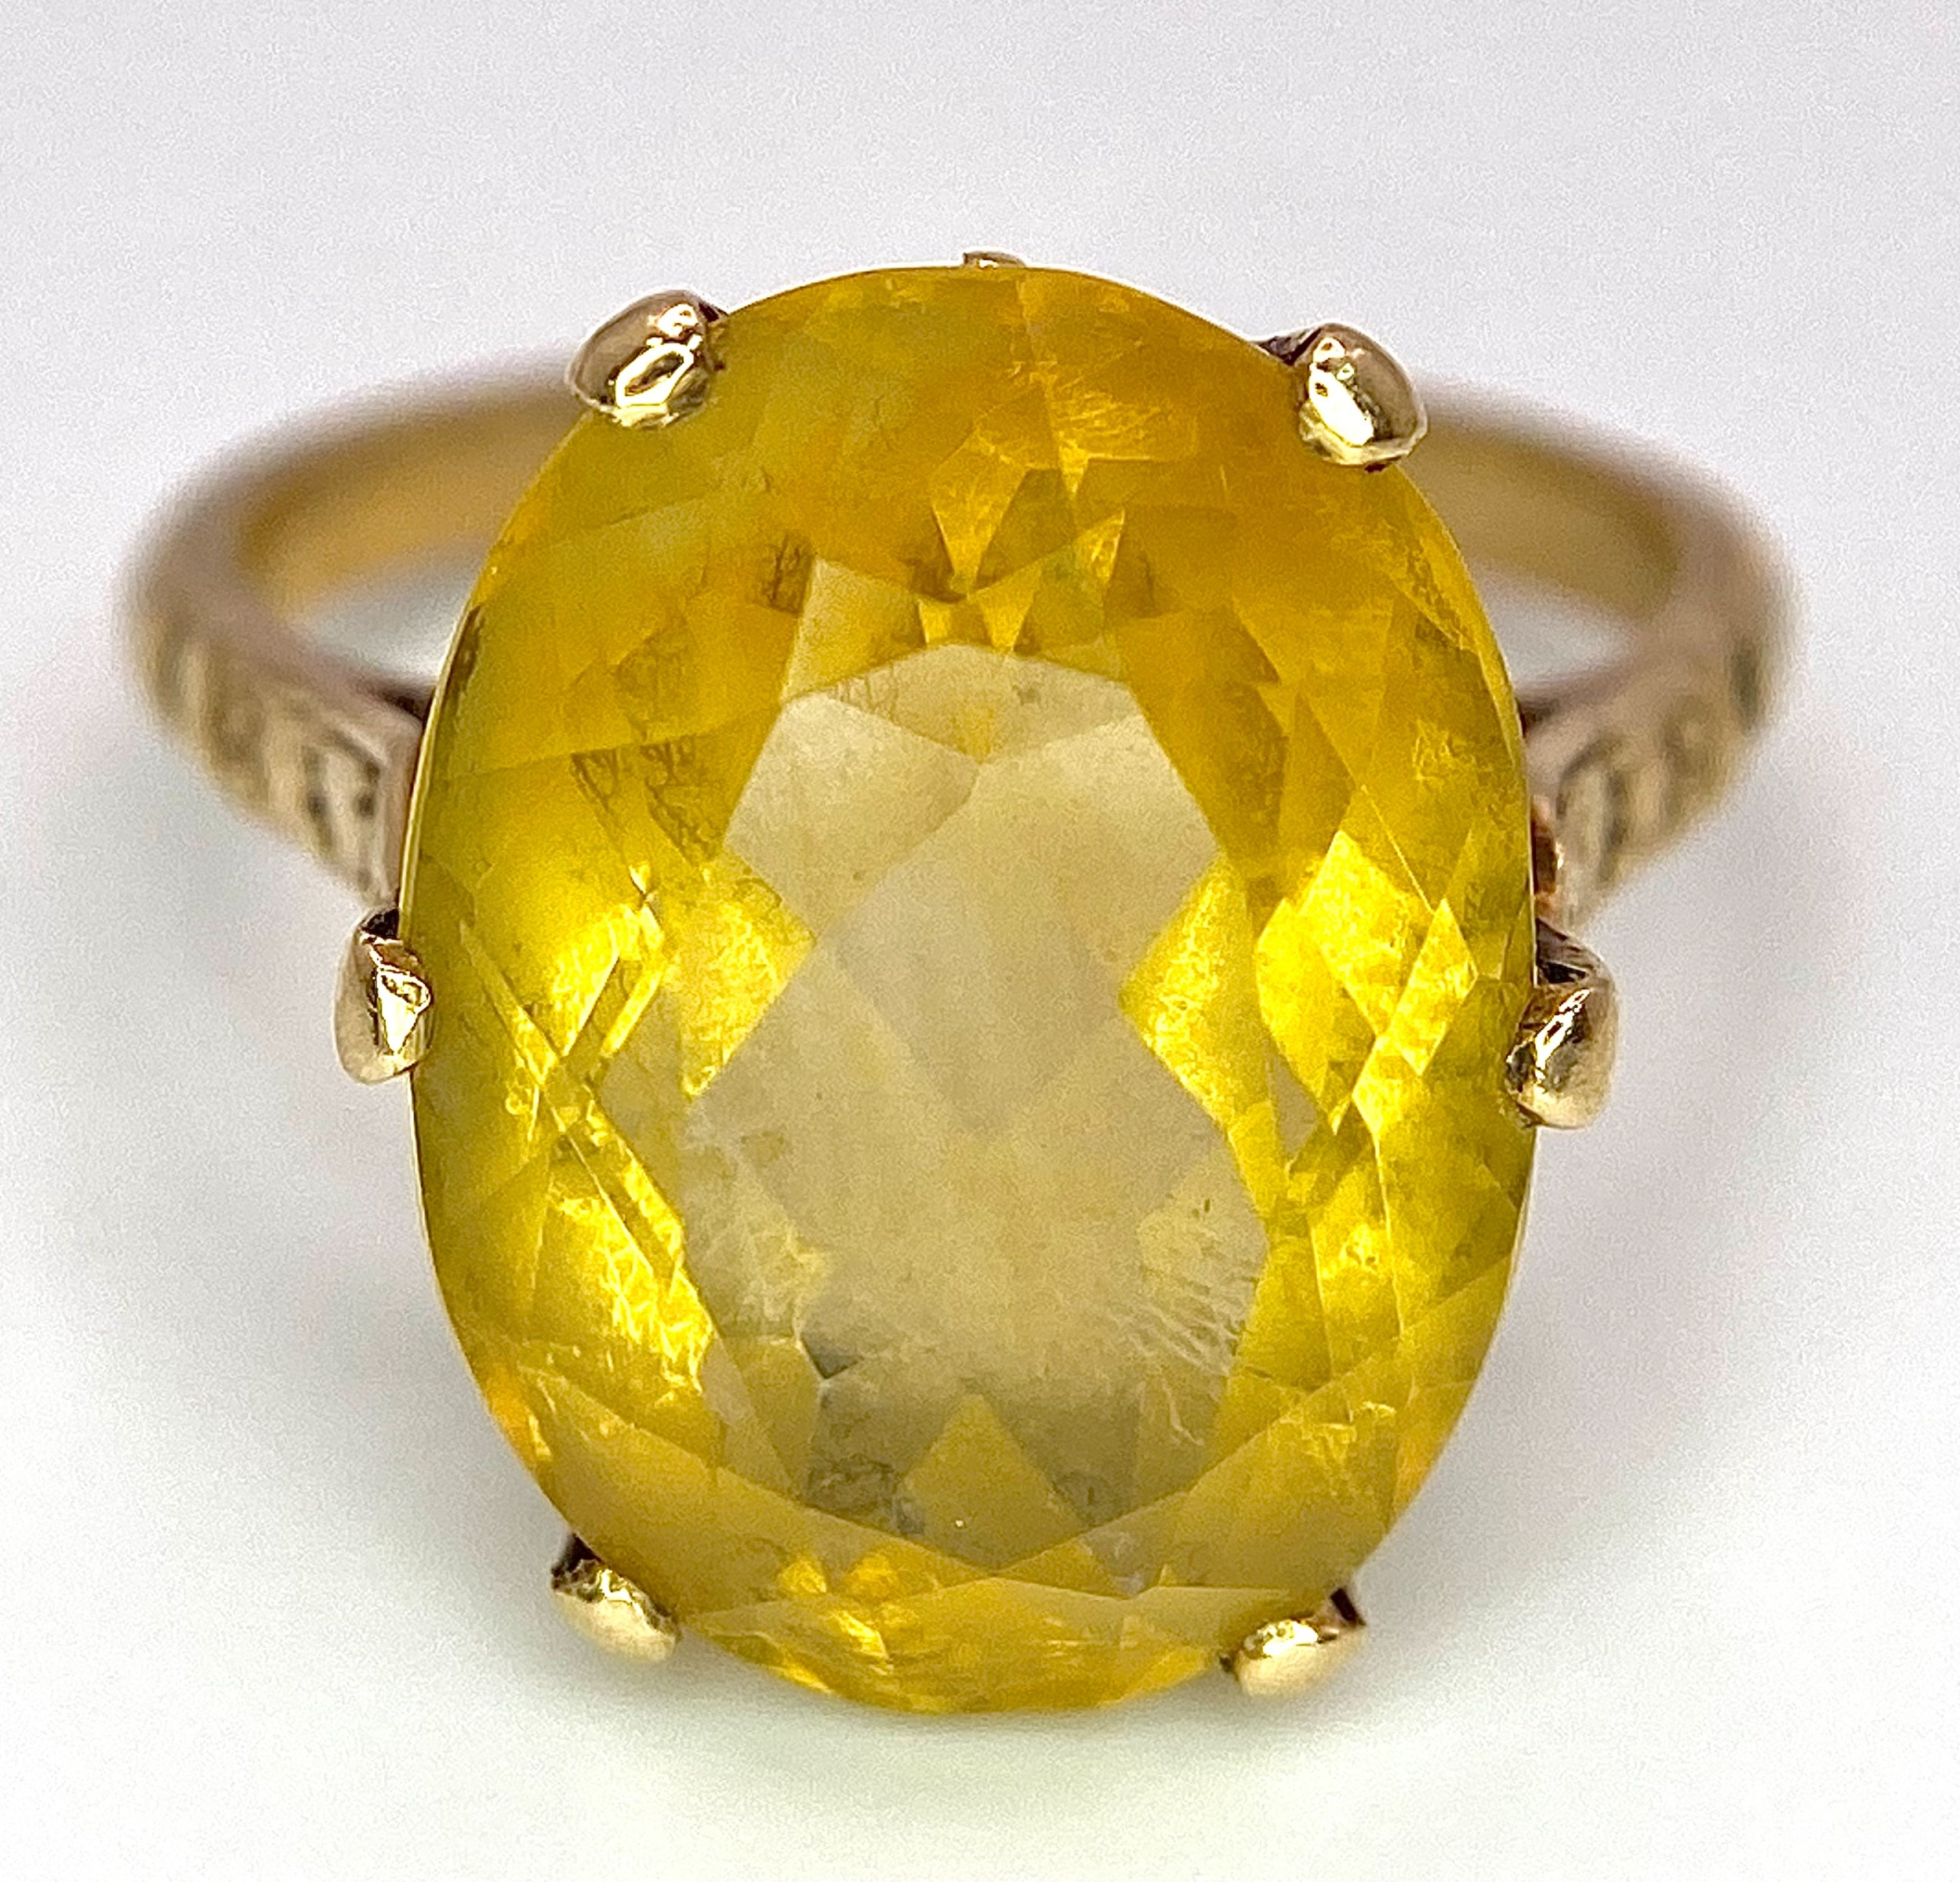 A Vintage 9K Yellow Gold Citrine Ring. 8ct oval cut citrine. Size Q. 5g total weight.